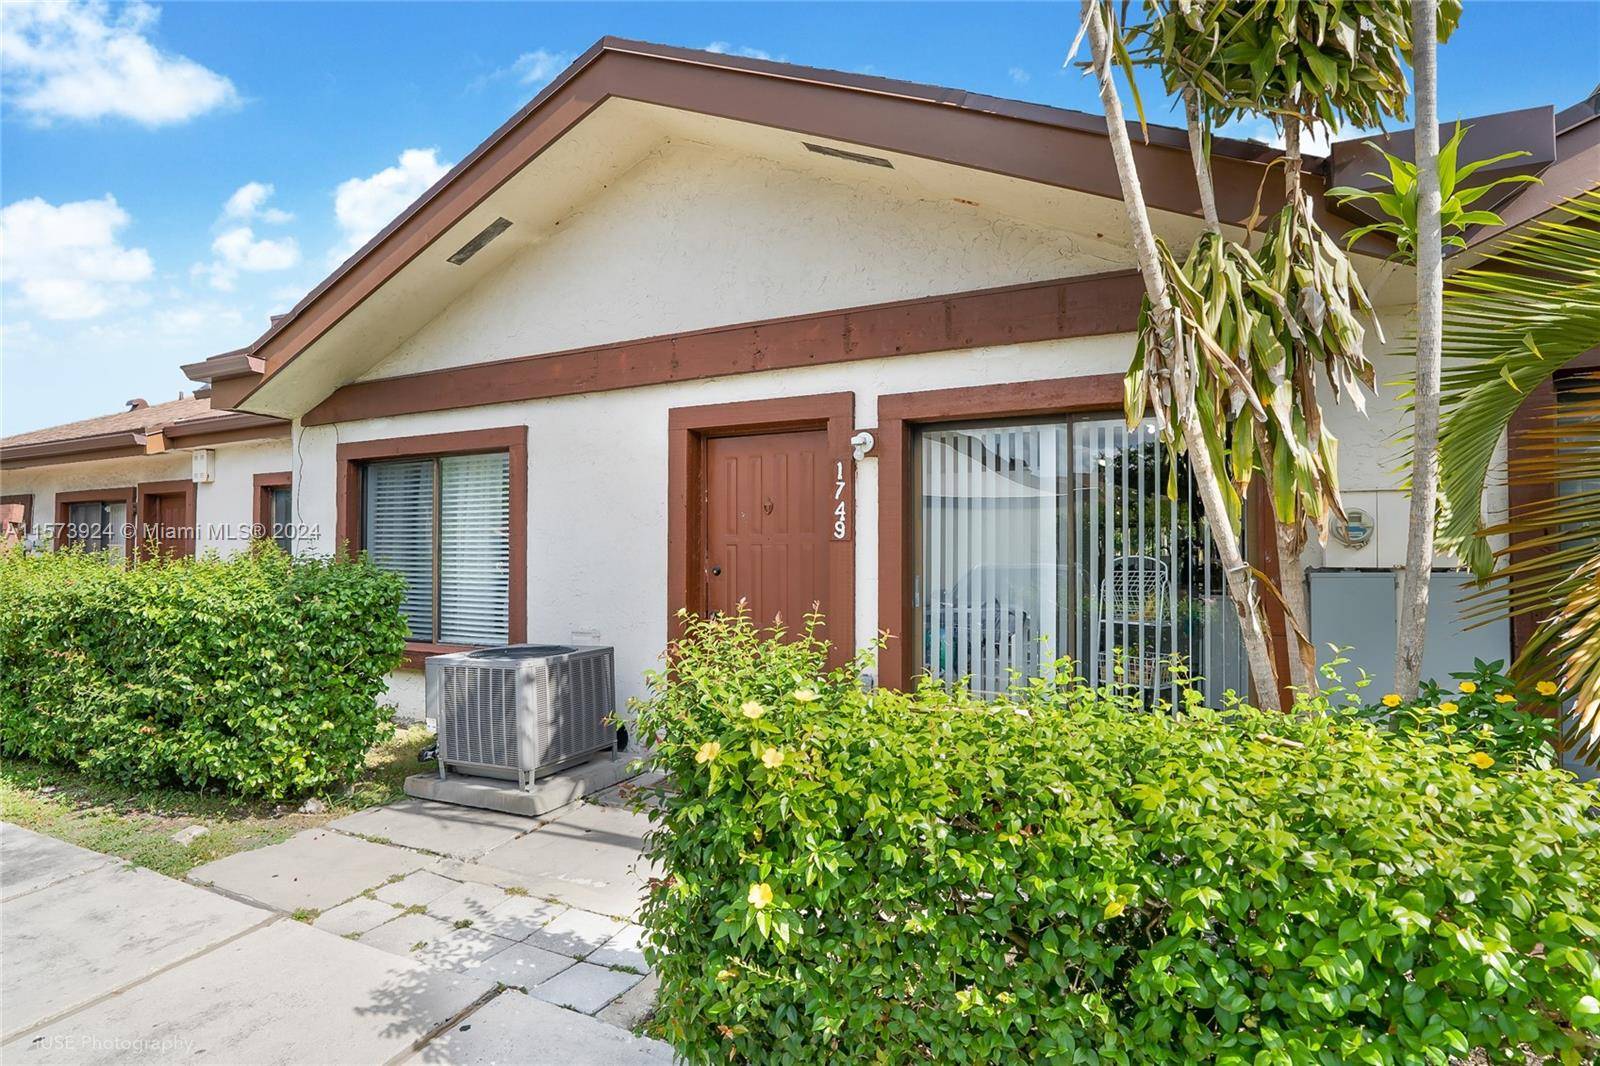 Perfectly located in Plantation, this updated 2Bed 2Bath 1, 175 SF villa with walk in closet, large patio, vaulted ceilings offers a blend of comfort and convenience.